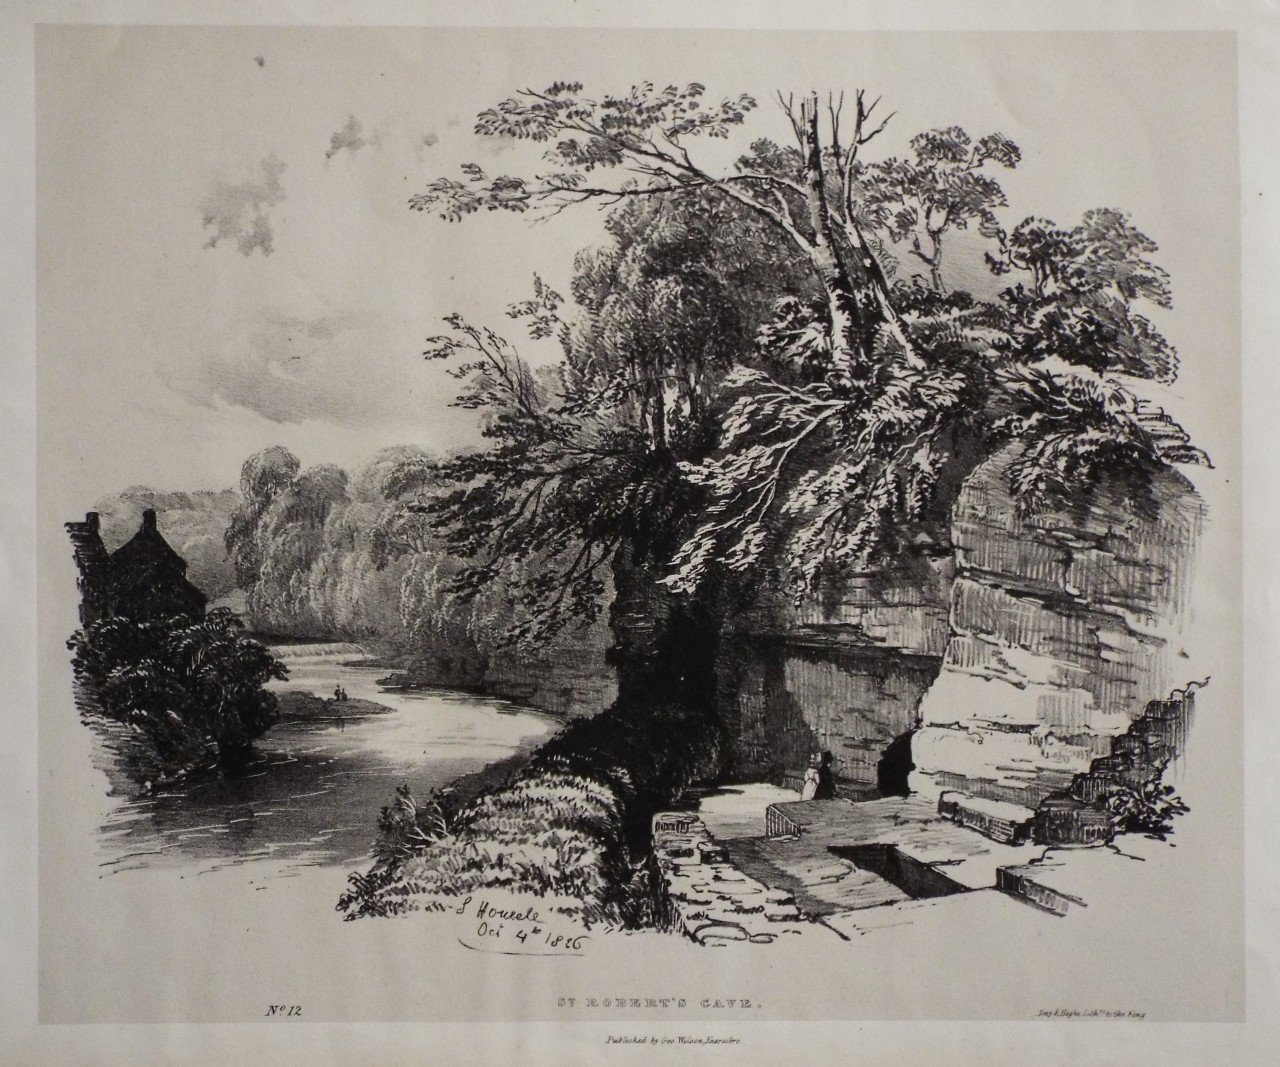 Lithograph - St. Robert's Cave. - Howell